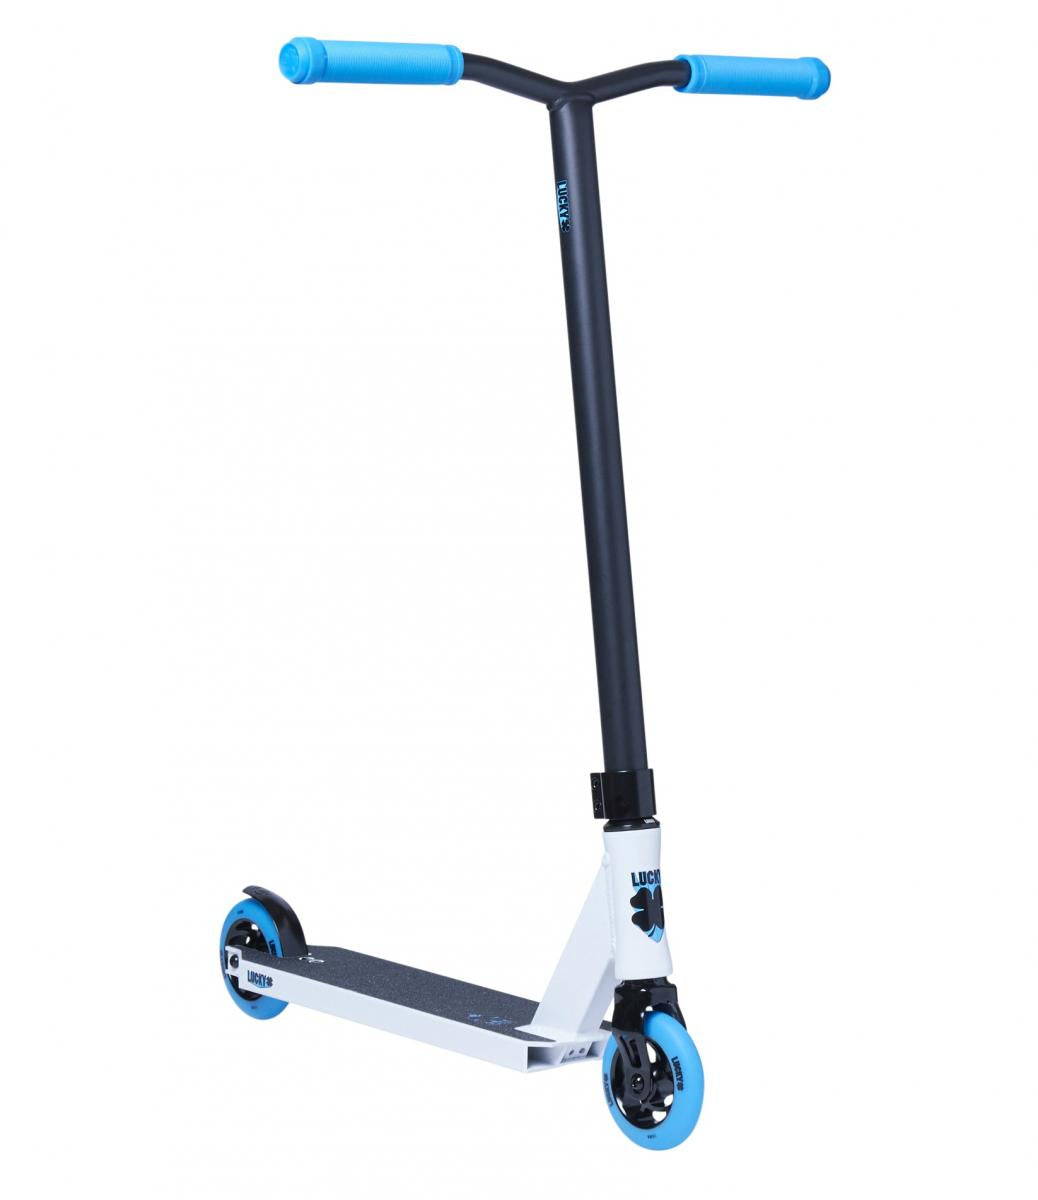 Lucky Crew Pro Stunt Scooter - White